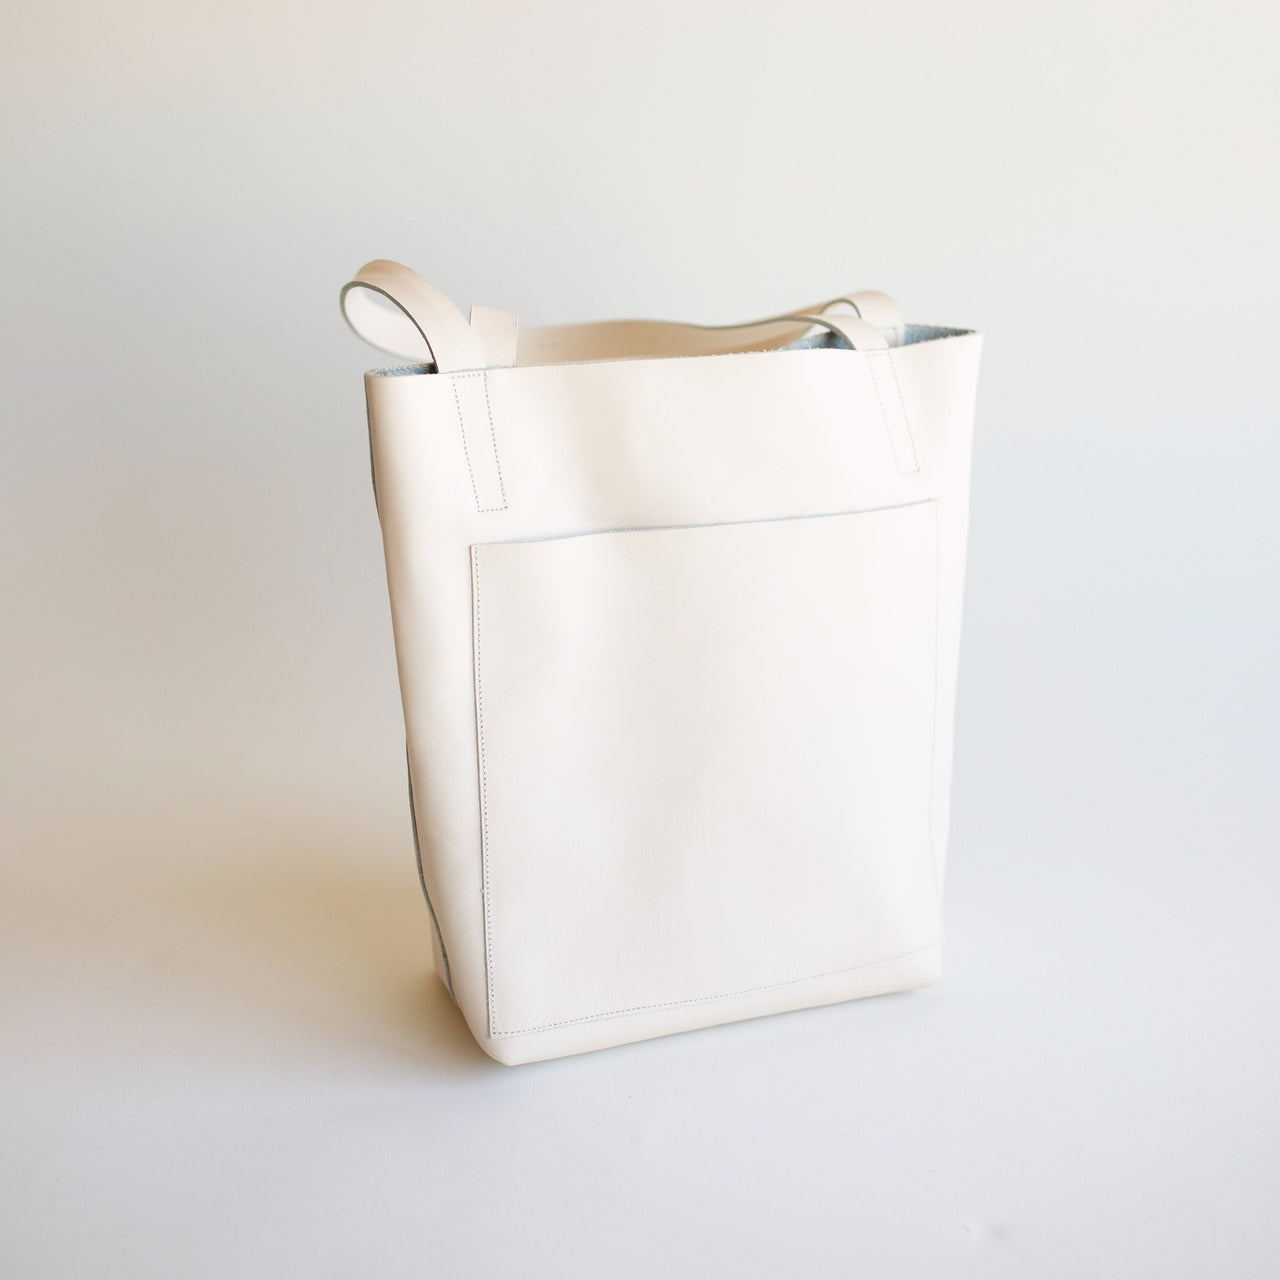 Adelisa & Co cream leather tote for children and women.